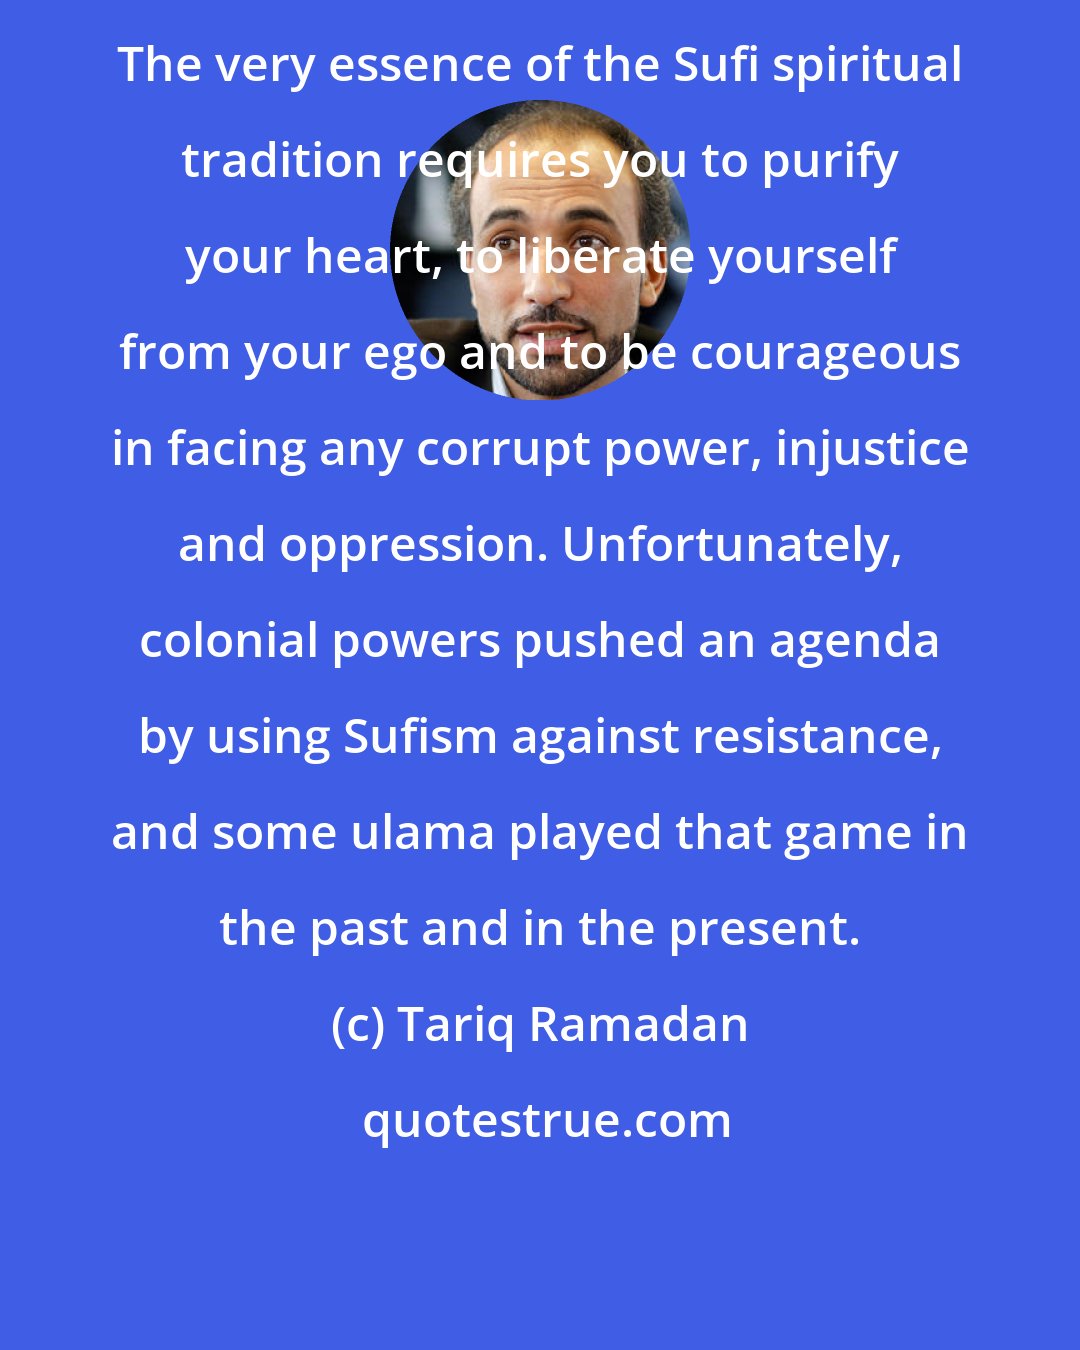 Tariq Ramadan: The very essence of the Sufi spiritual tradition requires you to purify your heart, to liberate yourself from your ego and to be courageous in facing any corrupt power, injustice and oppression. Unfortunately, colonial powers pushed an agenda by using Sufism against resistance, and some ulama played that game in the past and in the present.